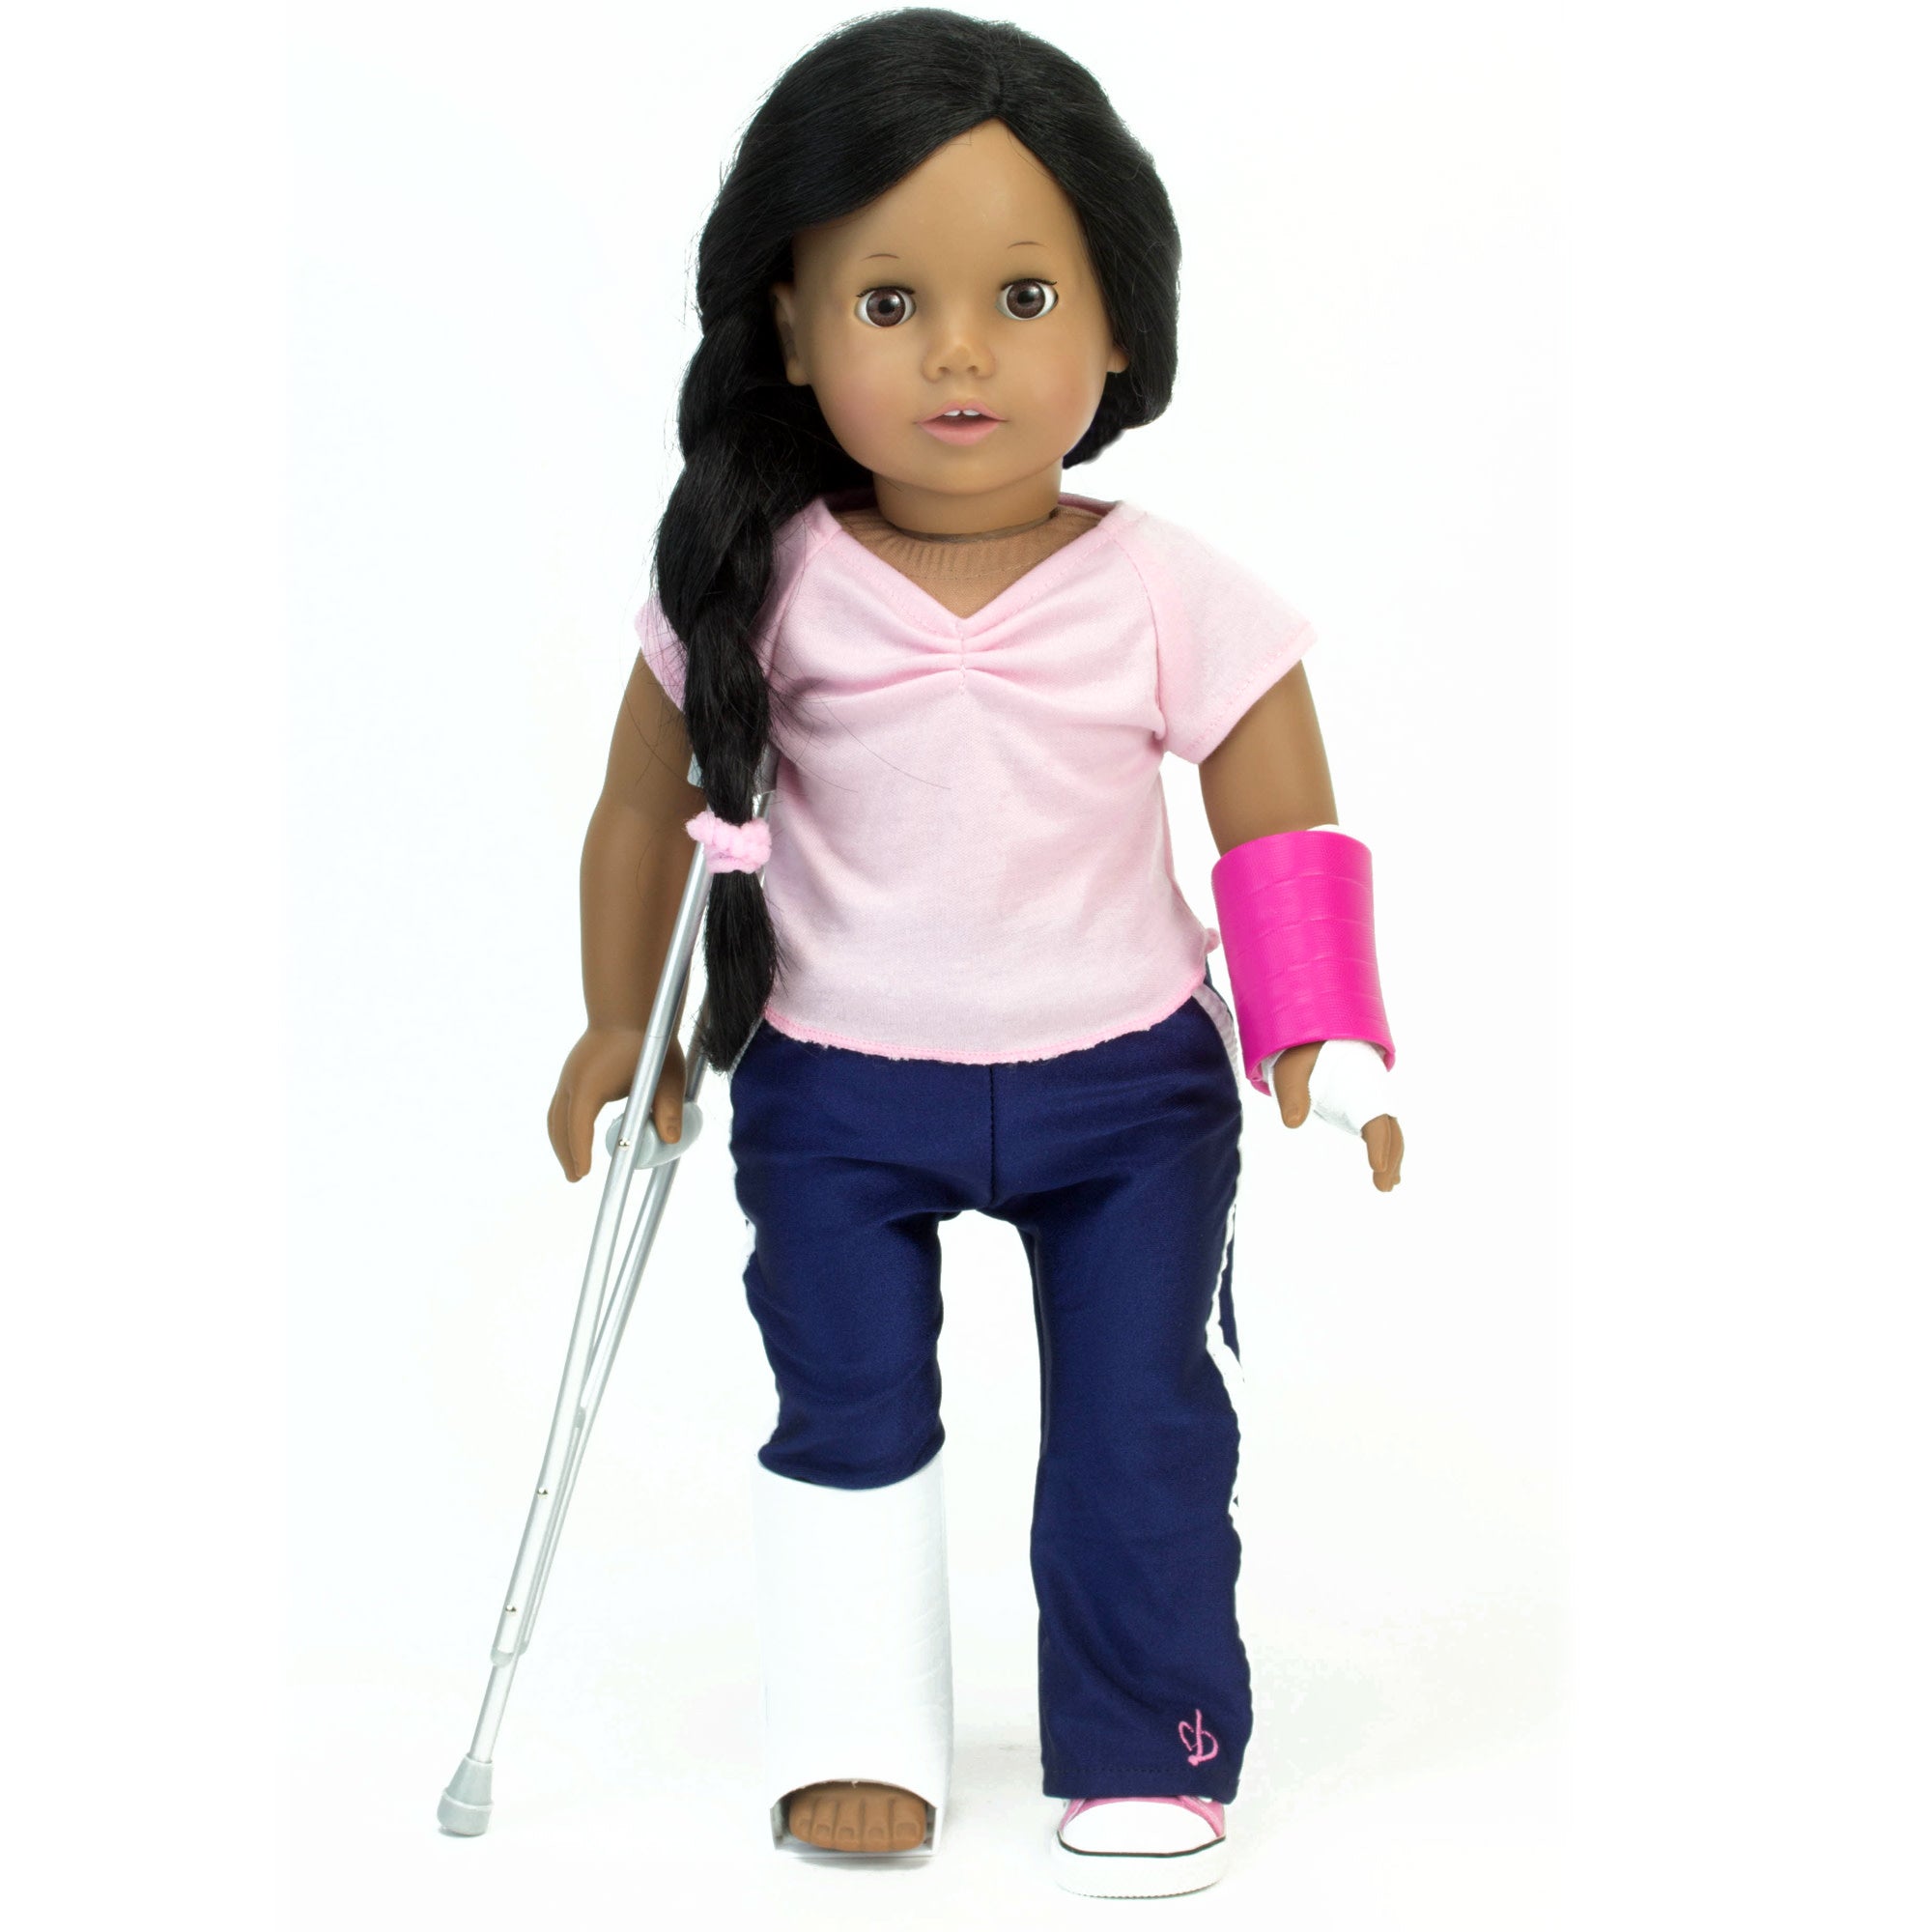 Sophia’s Doll Cast & Crutches Accessories Set for 18" Dolls